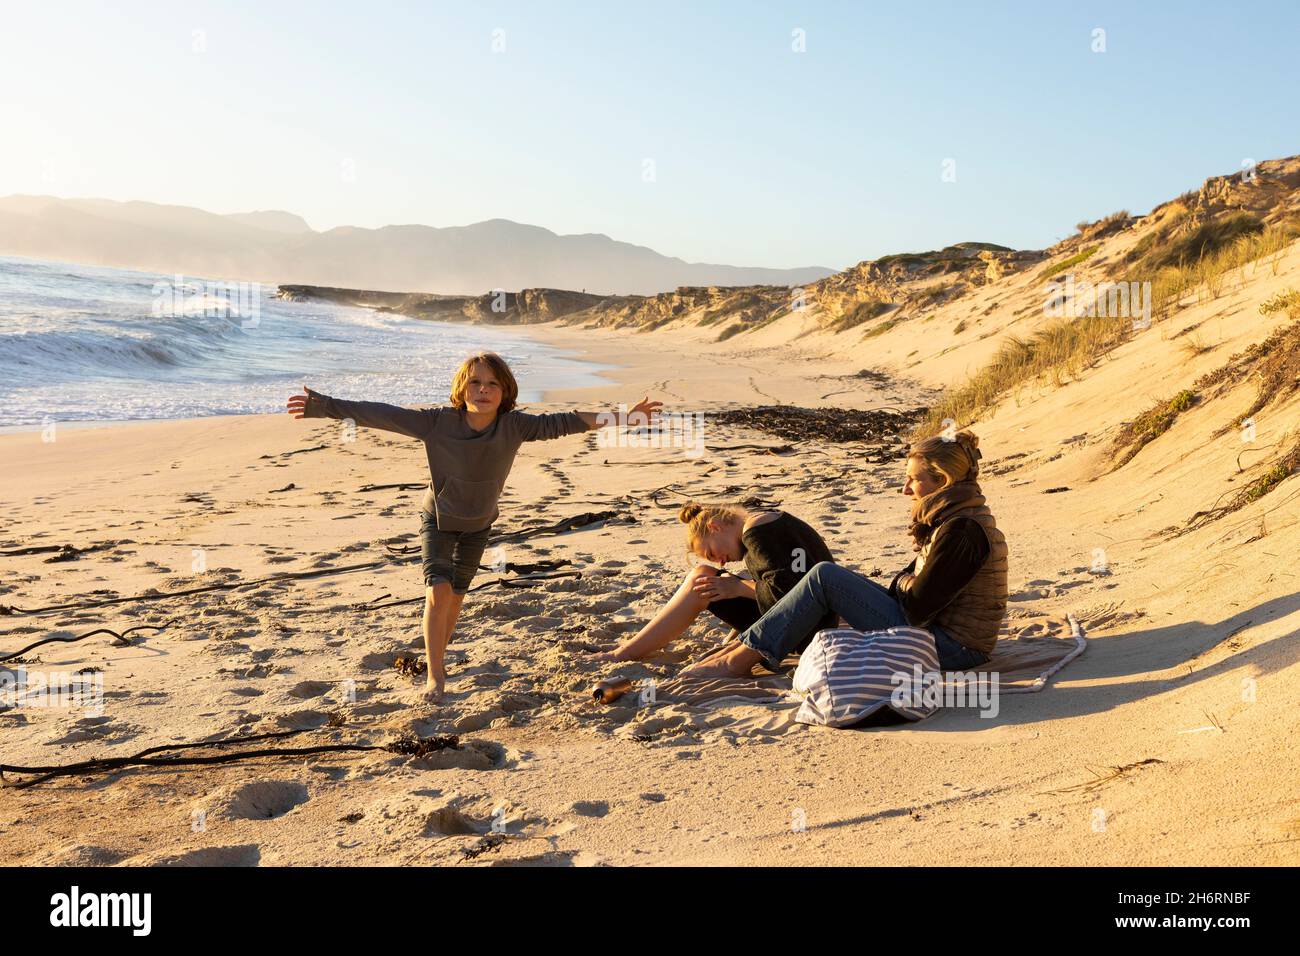 Family, mother daughter and son seated on a sandy beach looking out to sea. Stock Photo